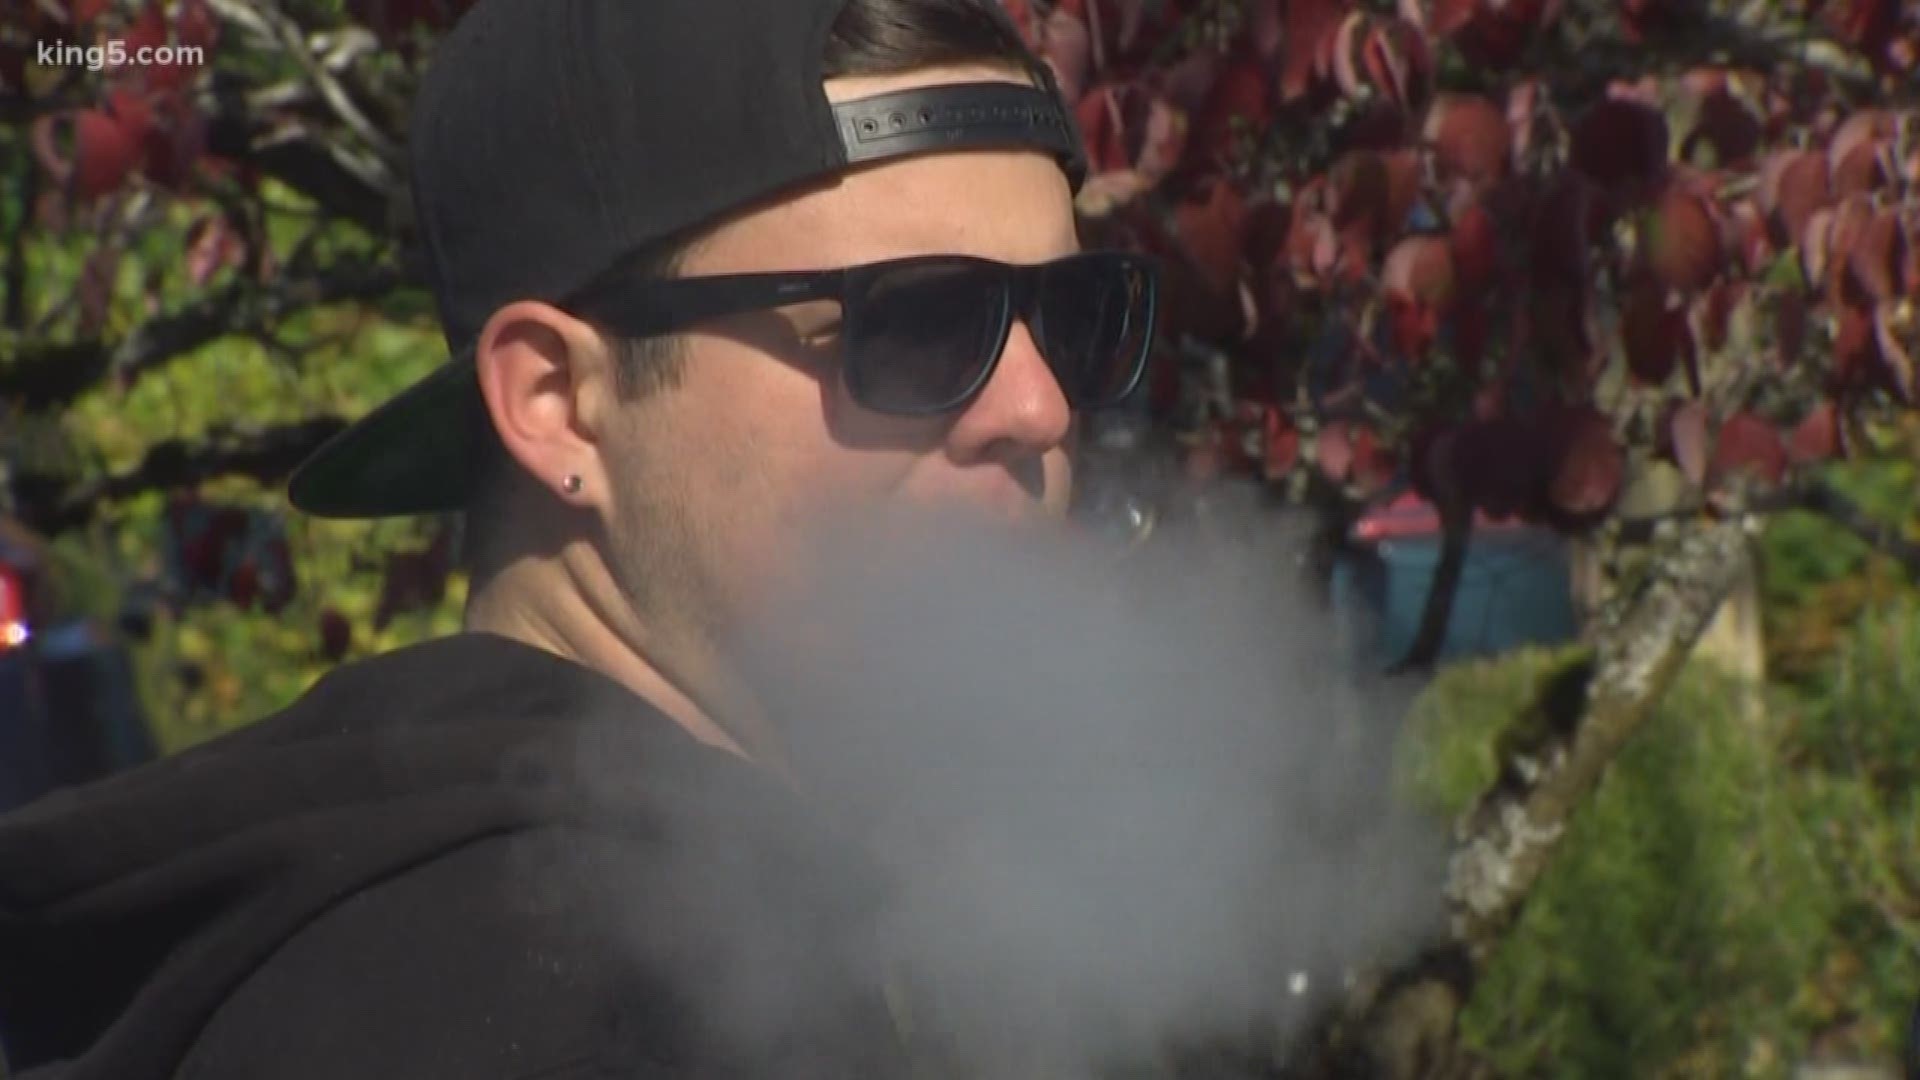 Washington vape shop owners are scrambling to stay in business amid an emergency ban on all flavored and THC vapor products. KING 5's Tony Black reports.